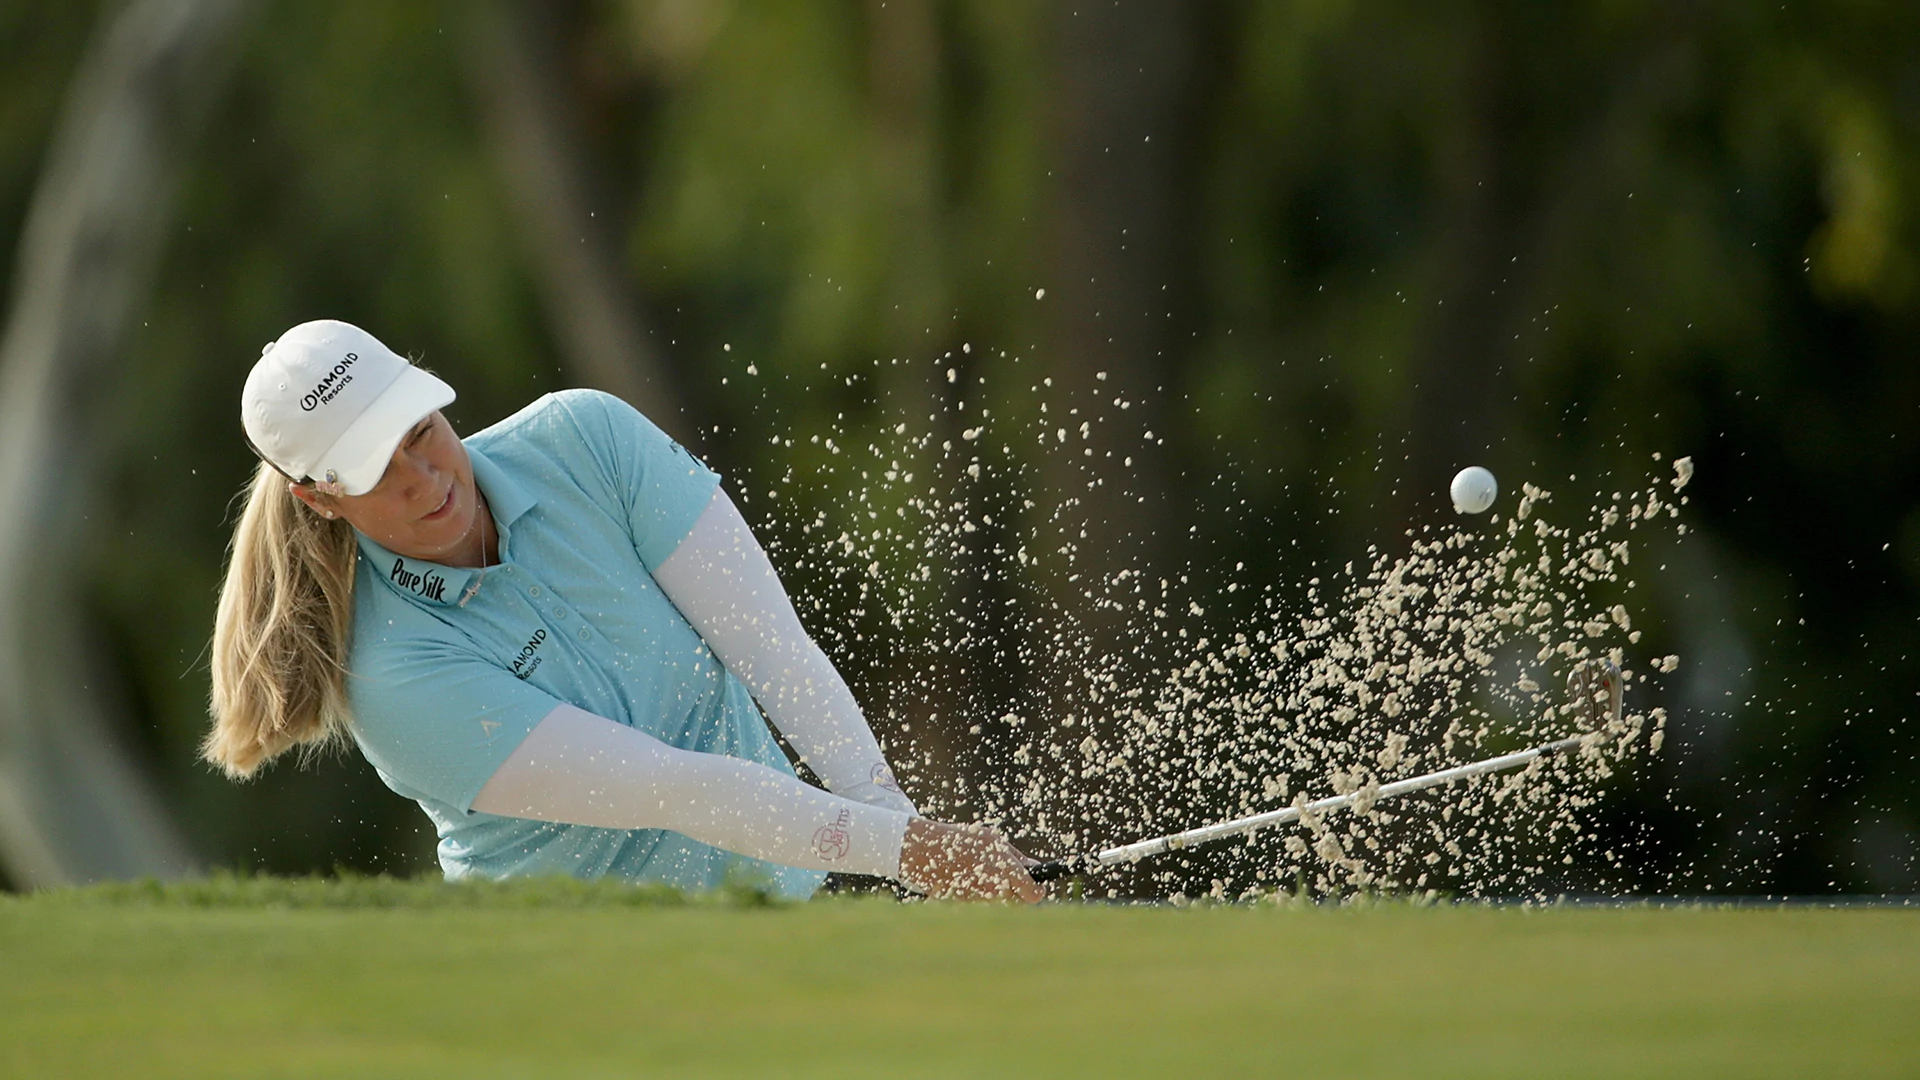 Thumb injury doesn't keep Brittany Lincicome from opening 69 at ANA 2